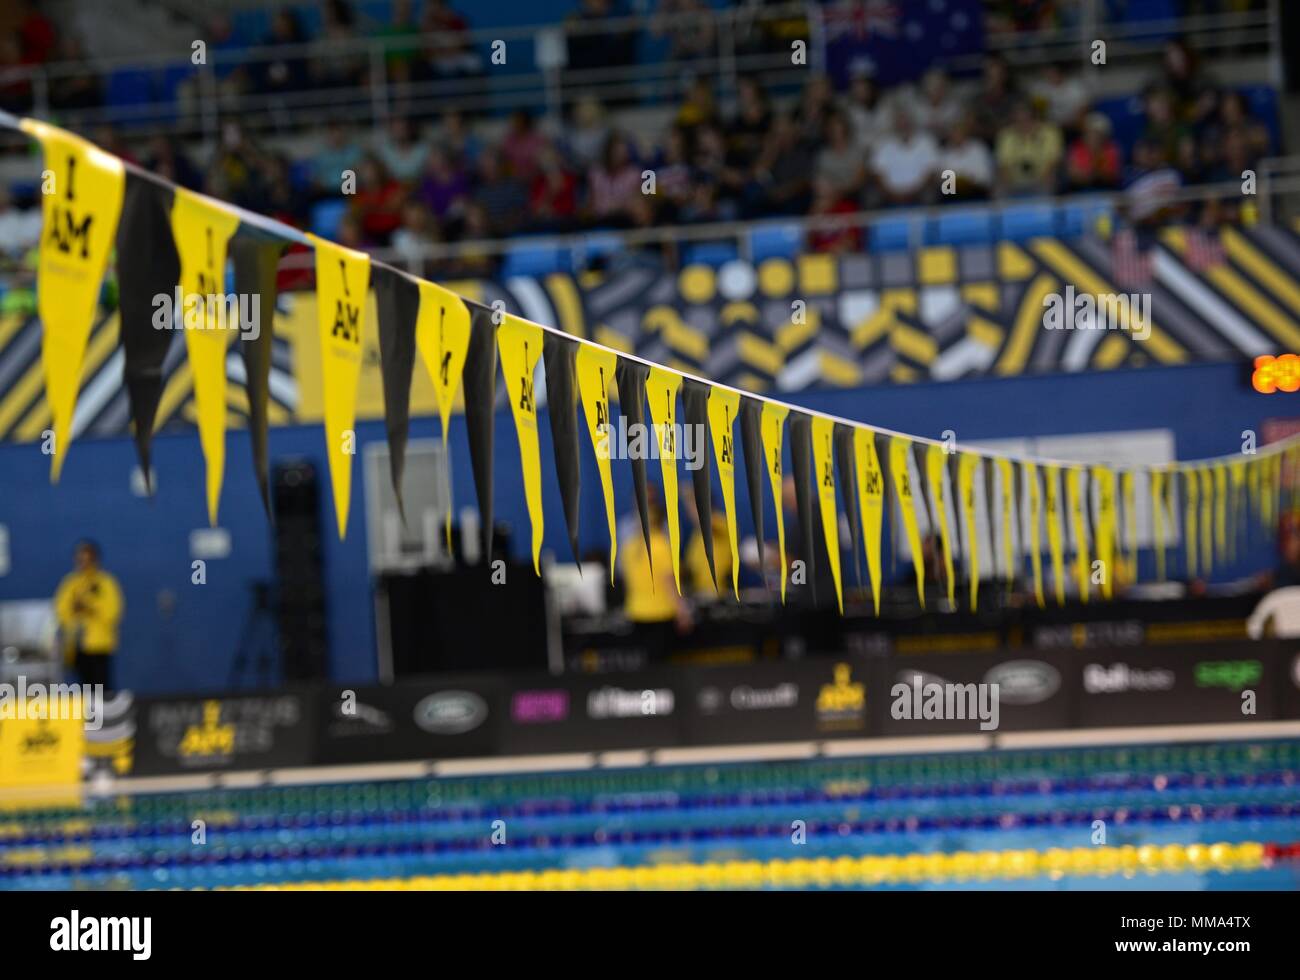 Athletes from 17 nations compete during swimming preliminaries at the 2017 Invictus Games in the Pan Am Sports Centre in Toronto, Canada, Sept. 28, 2017. The Invictus Games were established by Prince Harry of Wales in 2014, and have brought together more than 550 wounded and injured veterans to take part in 12 adaptive sporting events. (U.S. Air Force photo by Staff Sgt. Alexx Pons) Stock Photo